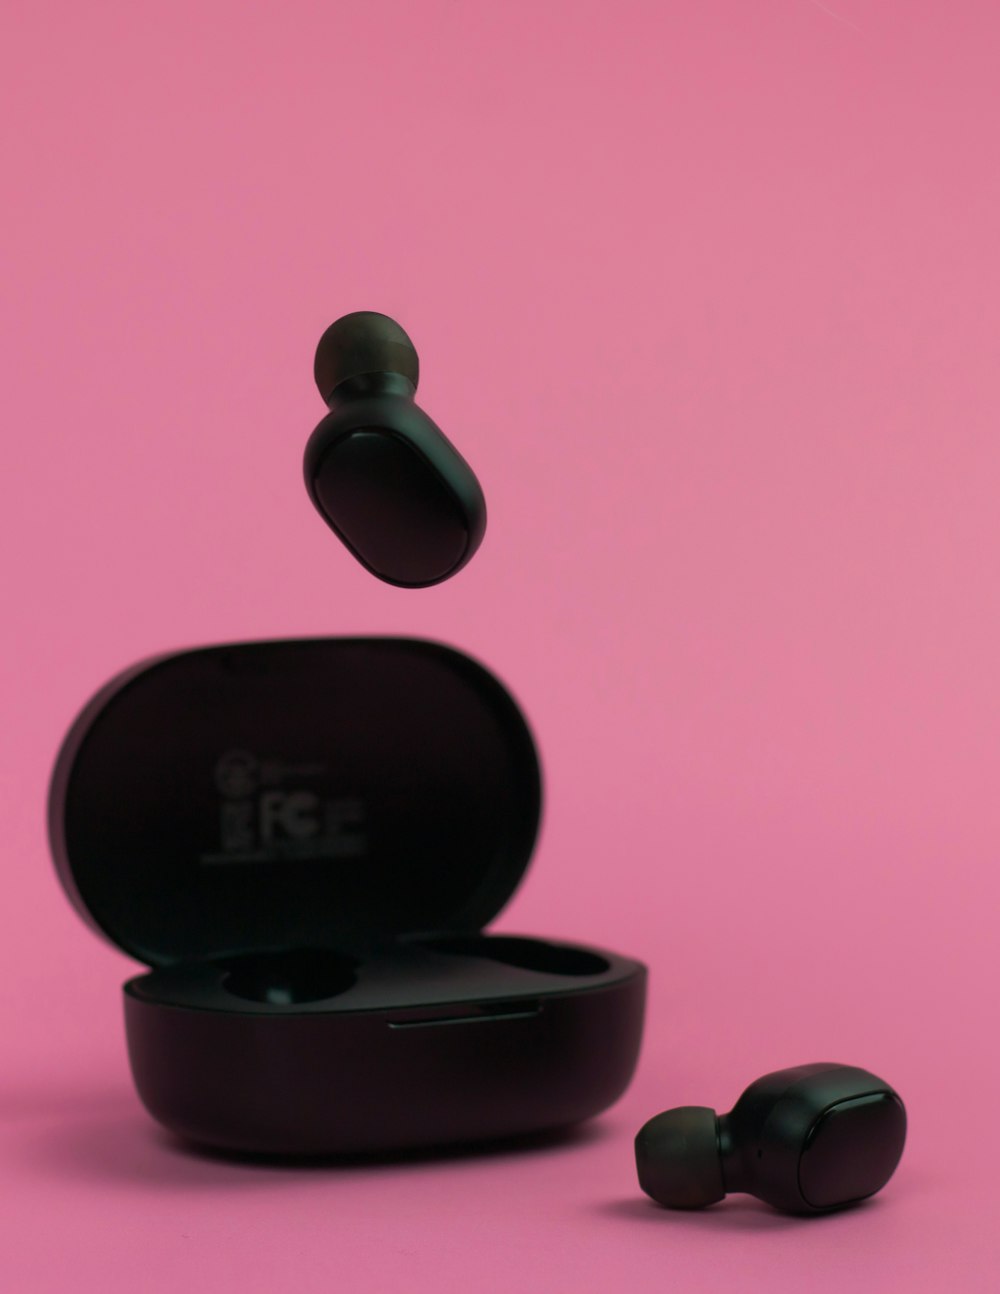 a pair of ear buds floating in the air